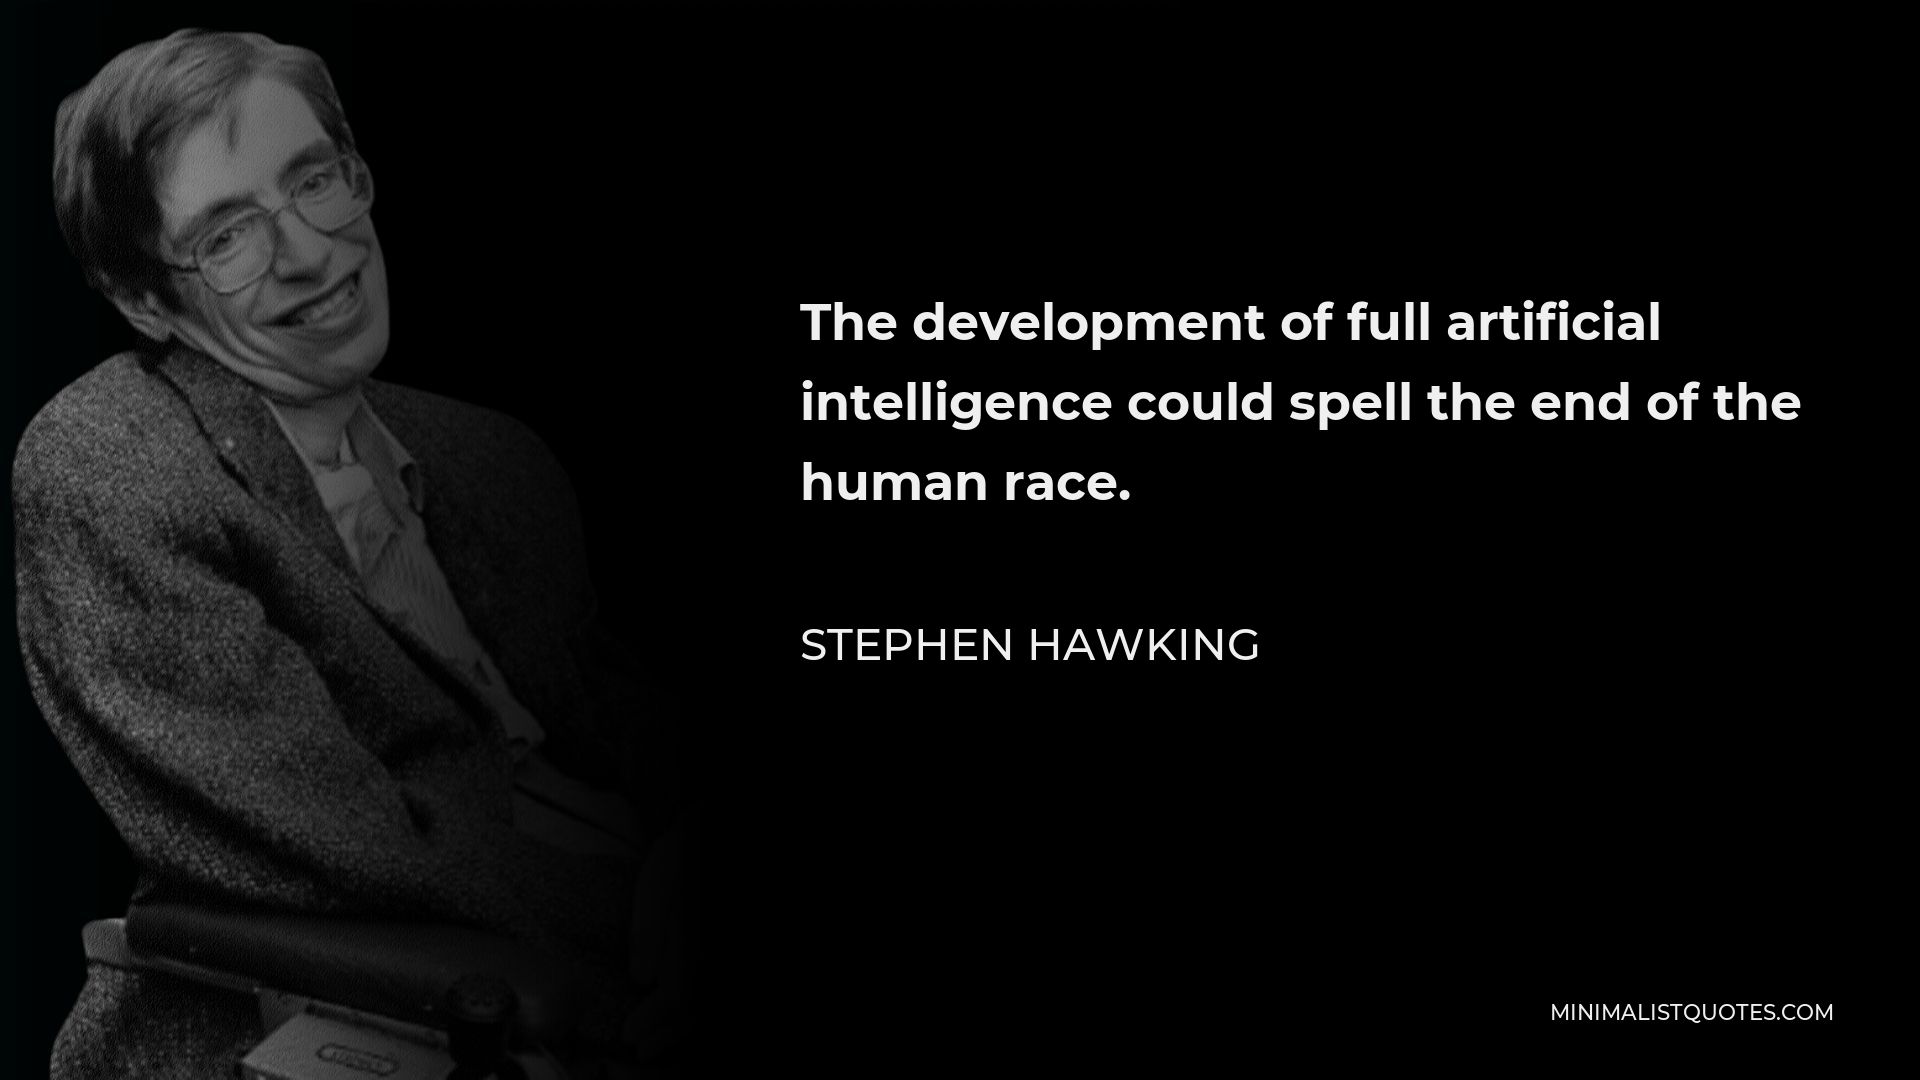 Stephen Hawking Quote - The development of full artificial intelligence could spell the end of the human race.